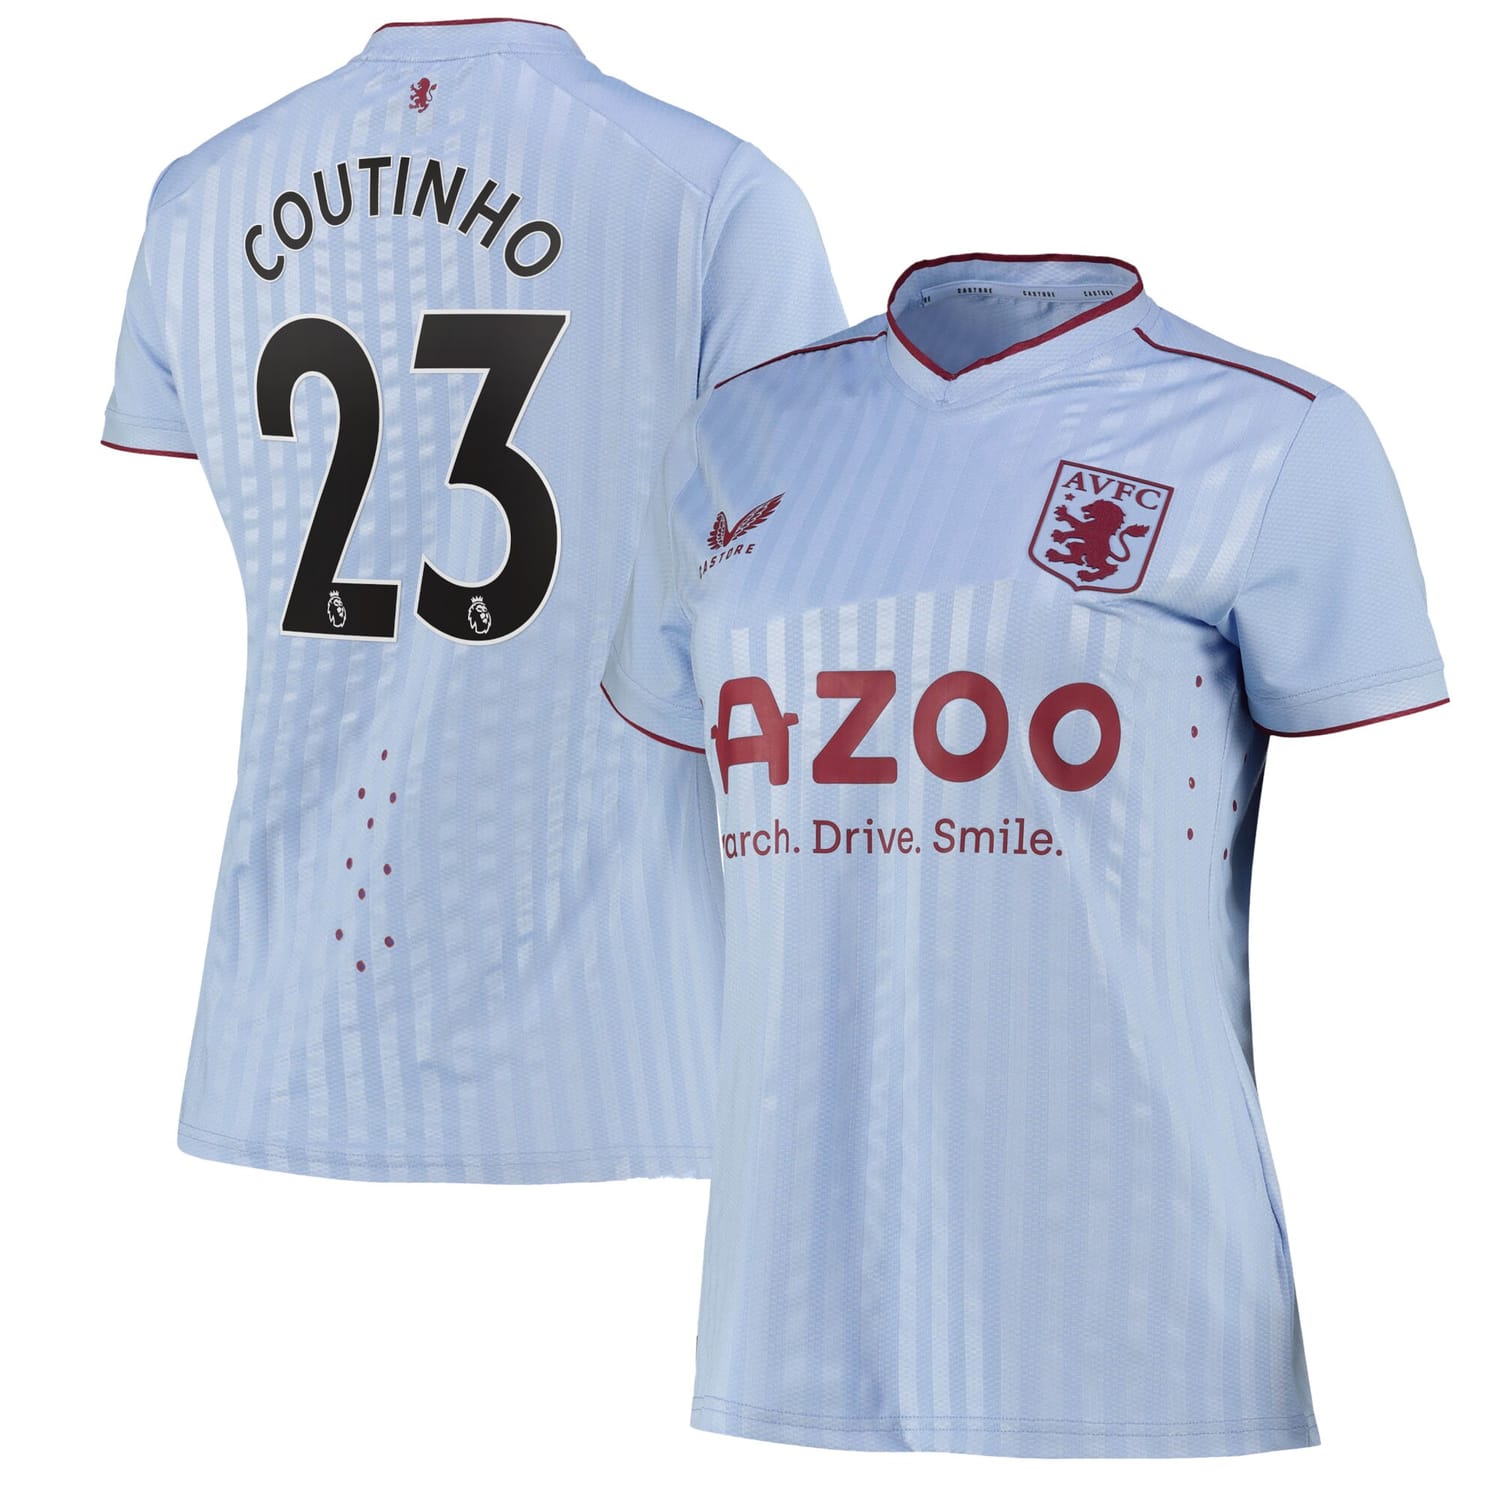 Premier League Ast. Villa Away Pro Jersey Shirt 2022-23 player Philippe Coutinho 23 printing for Women